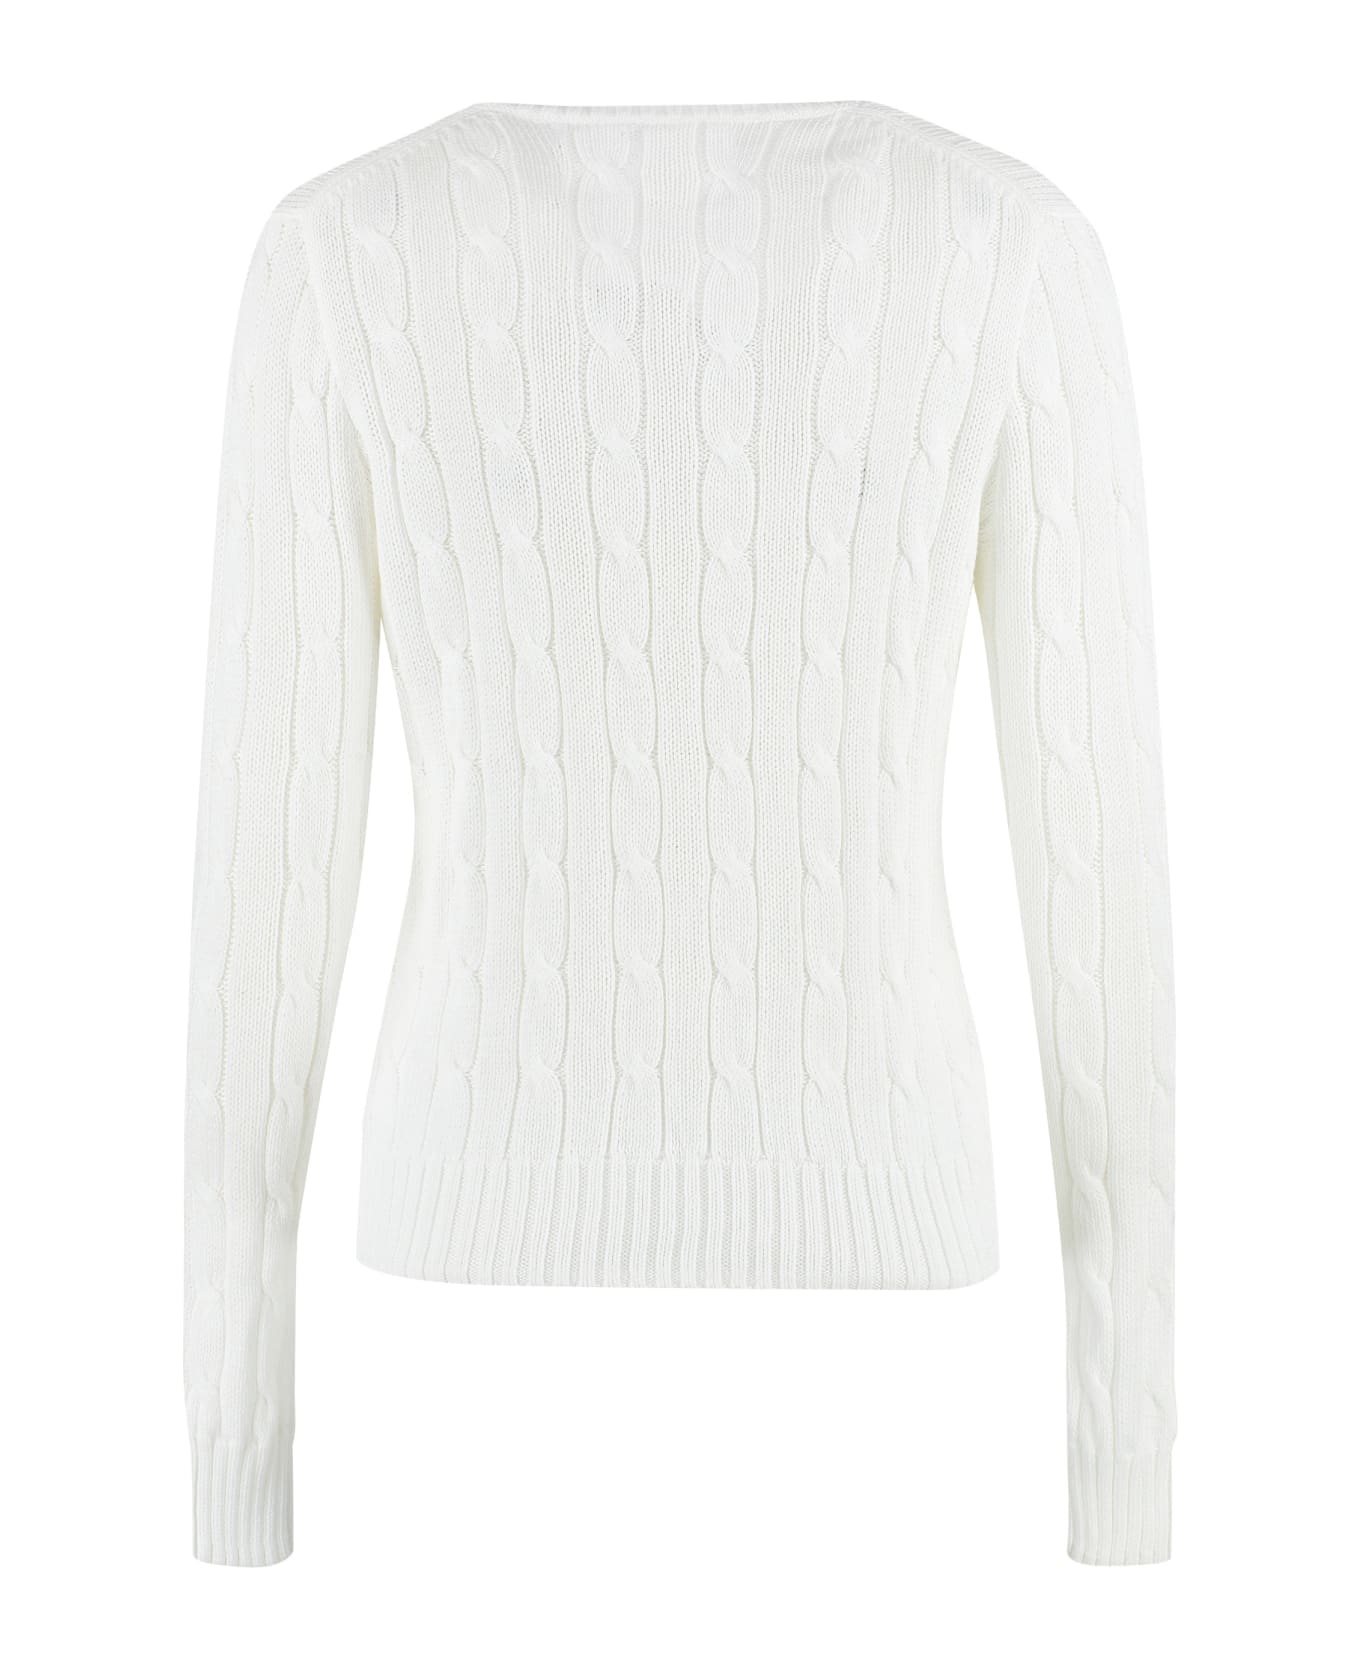 Ralph Lauren Cable Knit Sweater - White